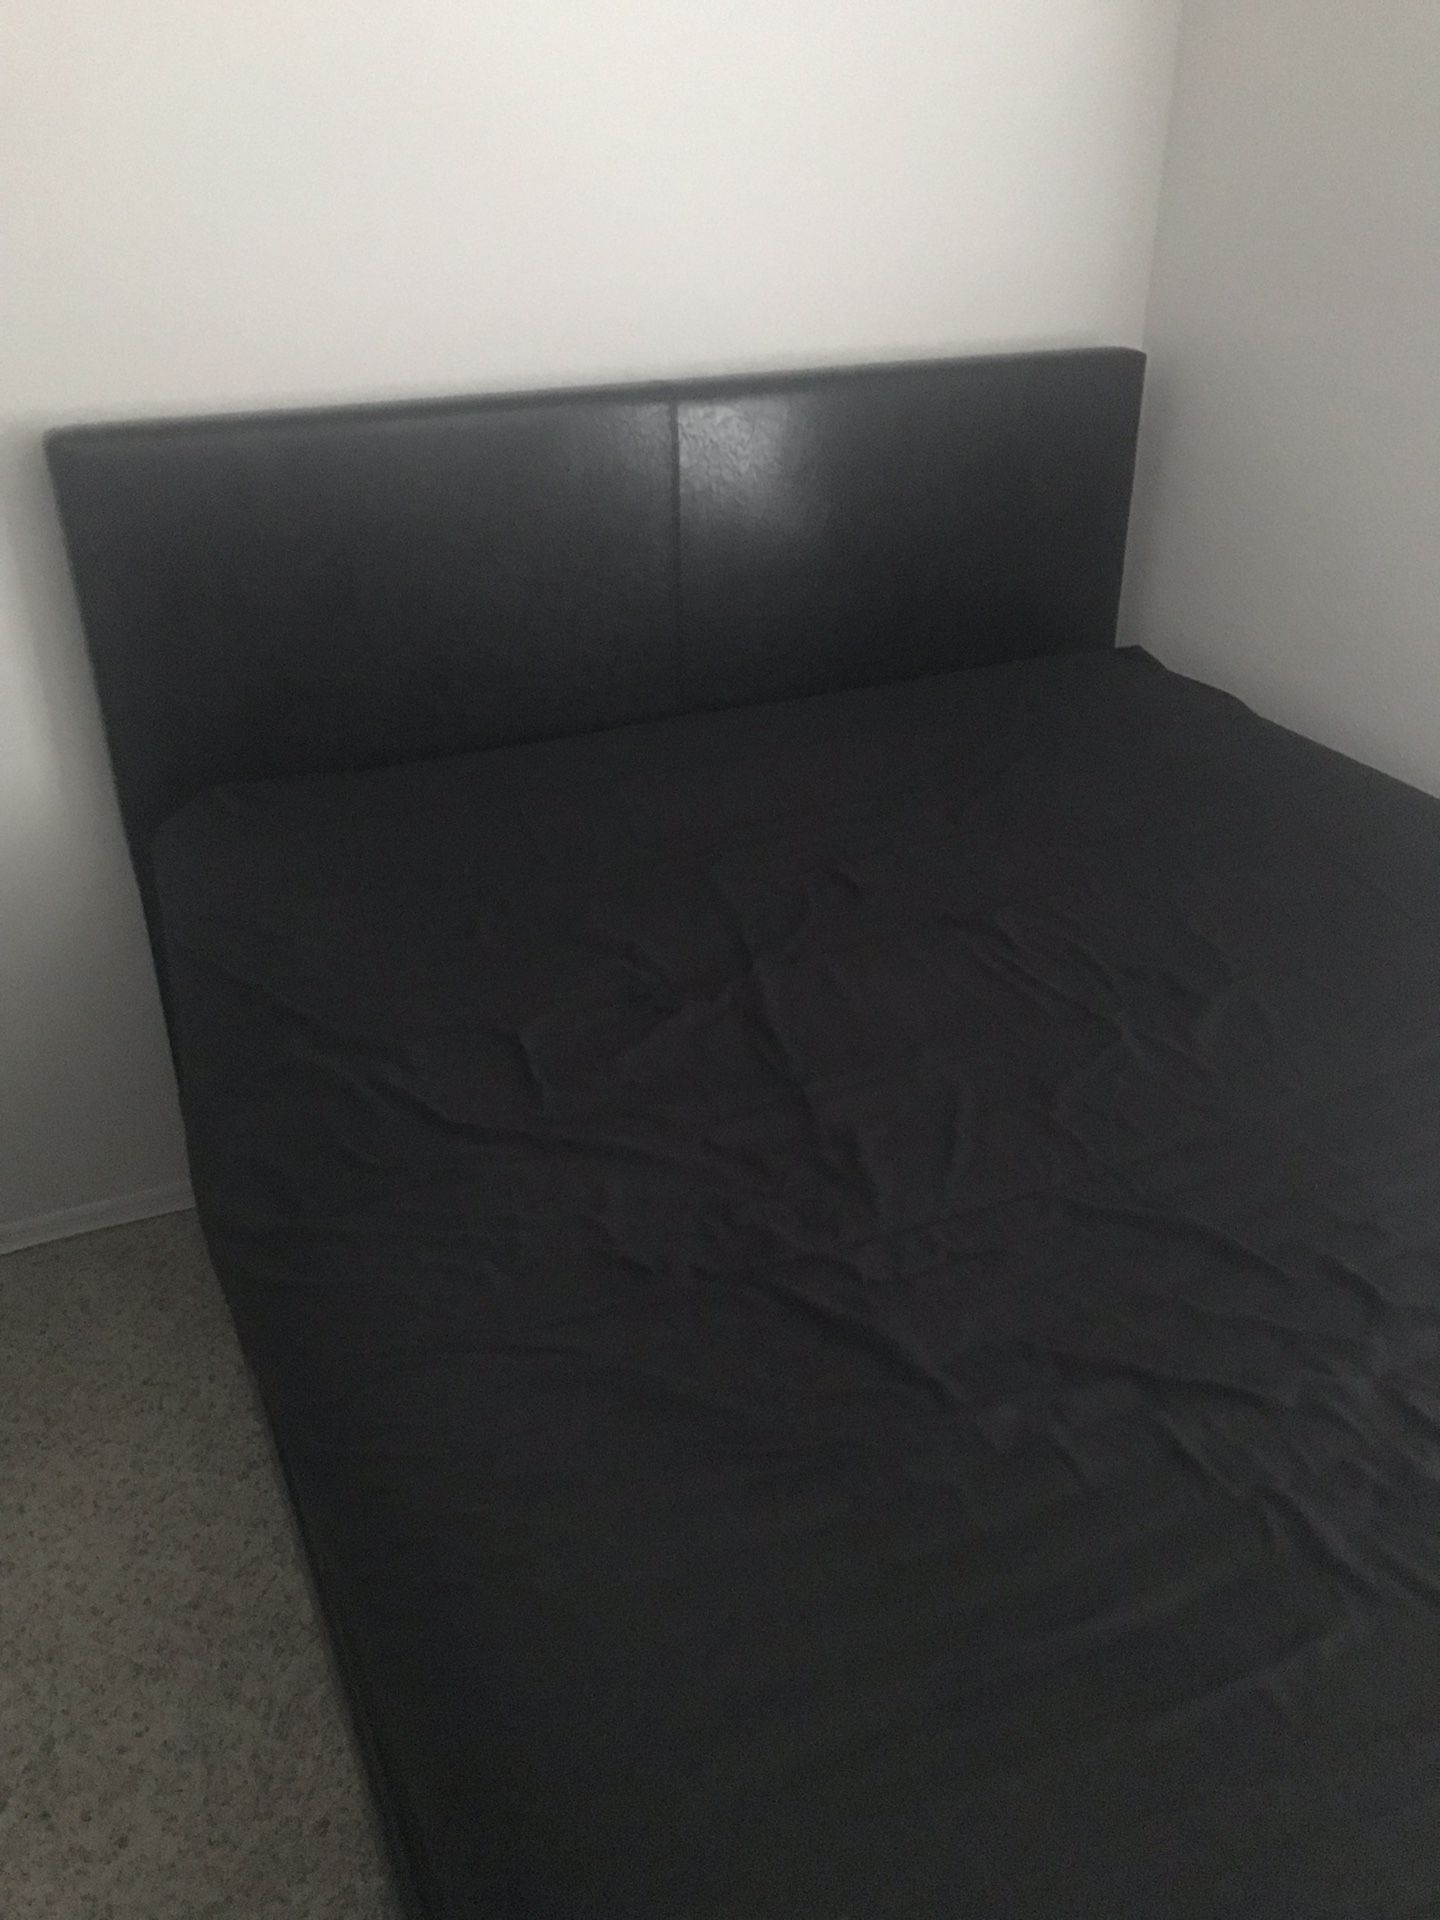 Gently Used Bed Frame For Sale